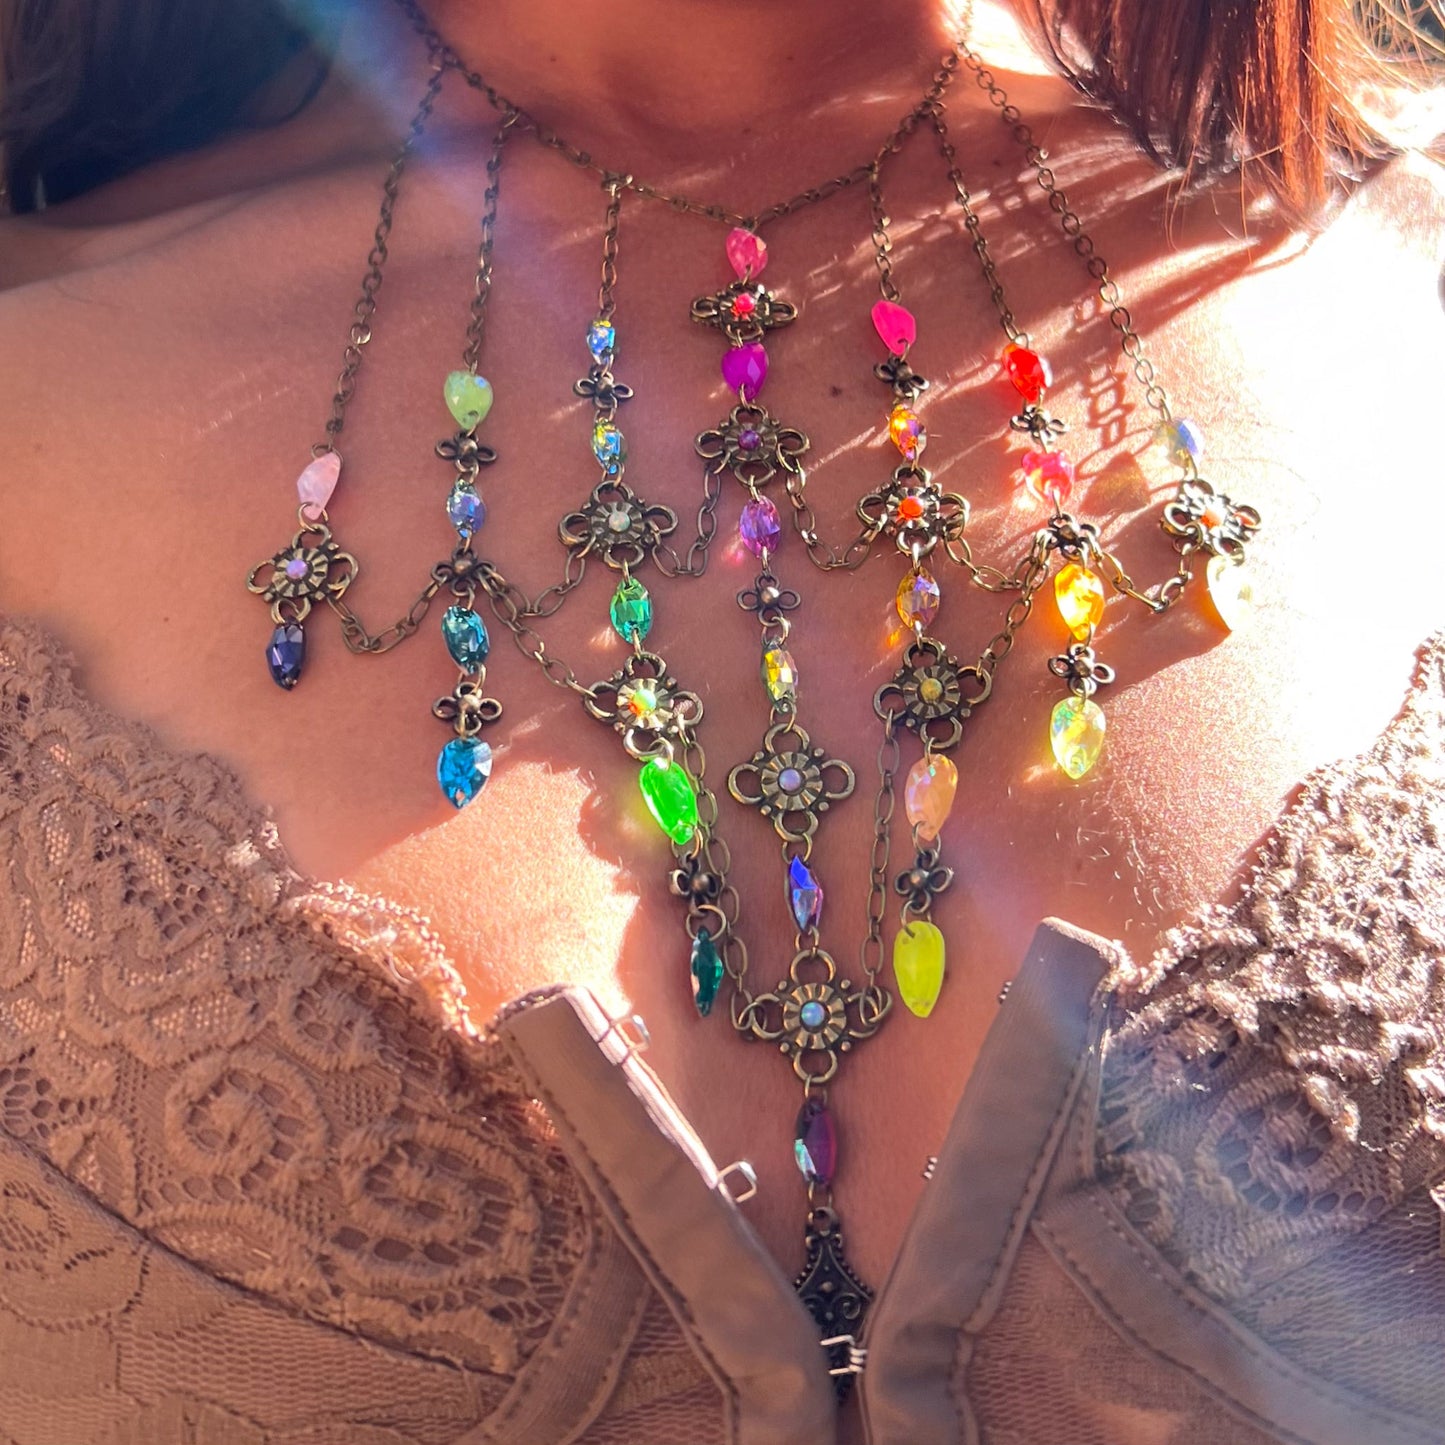 Stained Glass Necklace in Electric Forest